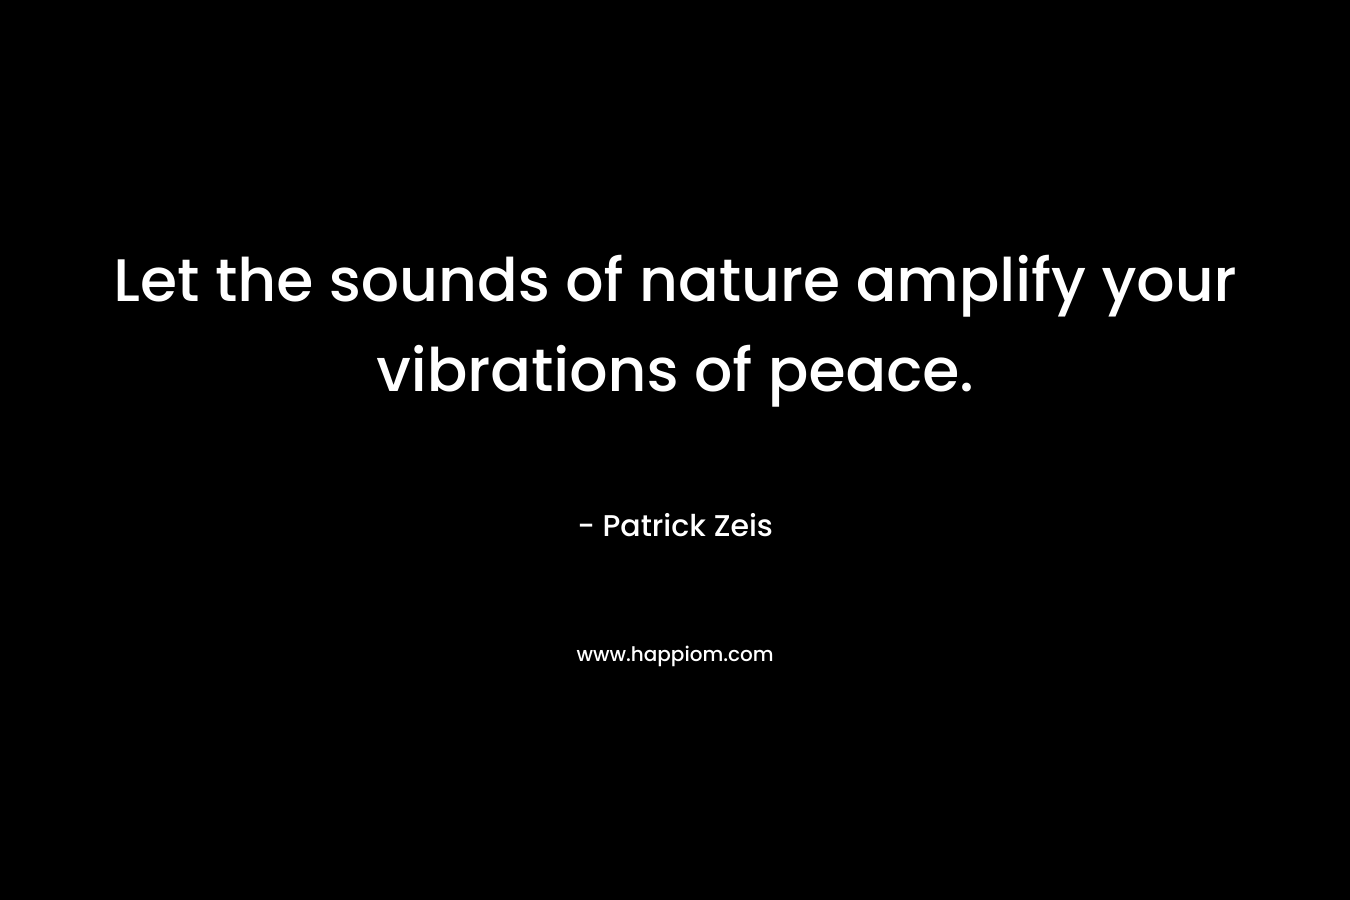 Let the sounds of nature amplify your vibrations of peace. – Patrick Zeis